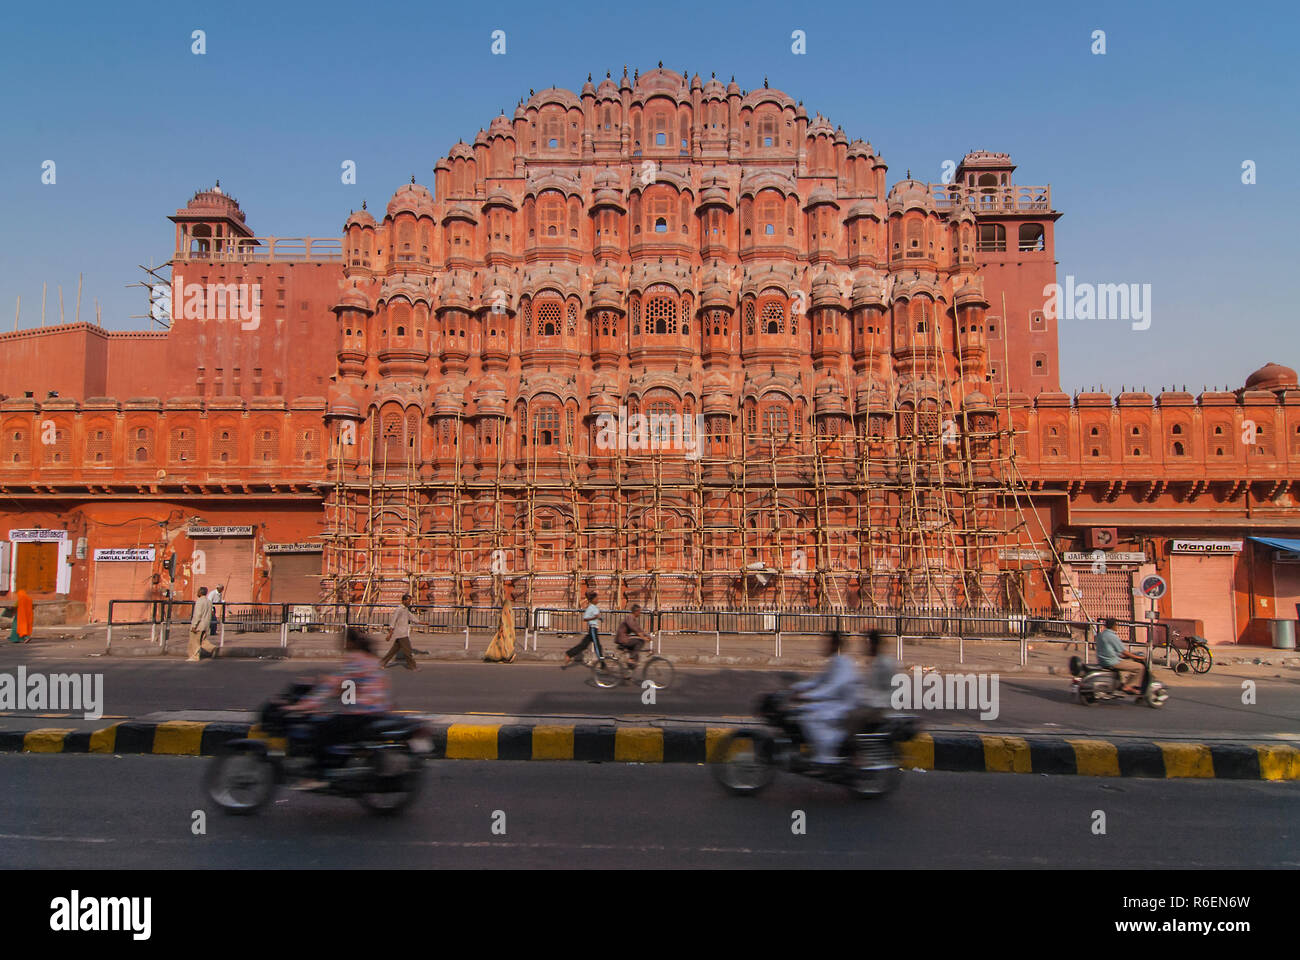 The Palace Of The Winds, Or The Hawa Mahal, In Jaipur, Rajasthan, India Stock Photo